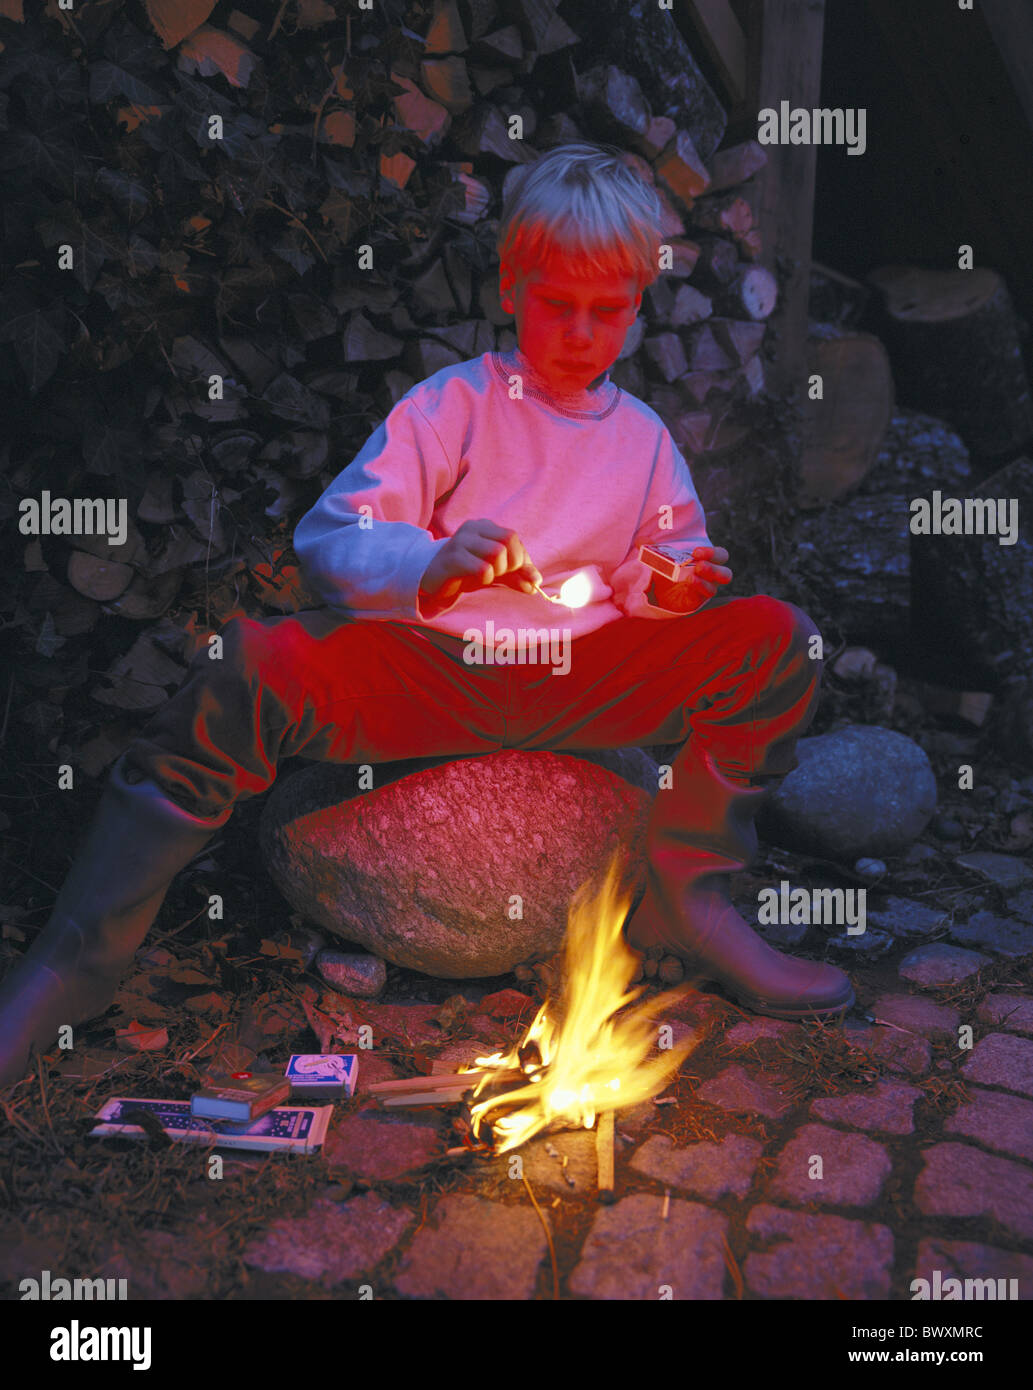 flare pyrotechnic matches burn fires boy child sit small Gefahrr fire pyromaniac at night red light sh Stock Photo